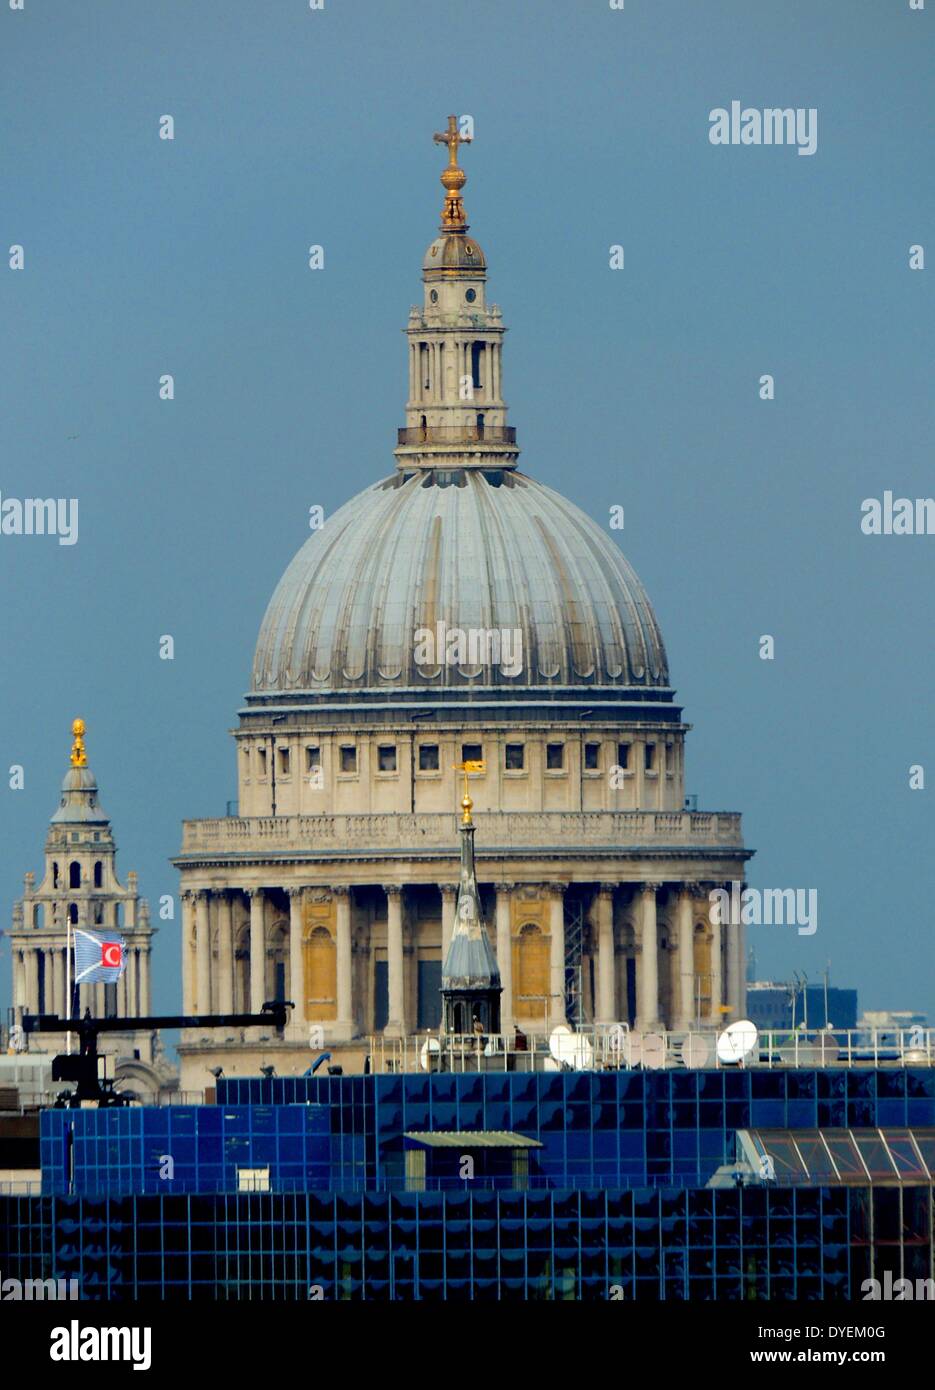 View of the Dome of St Paul's Cathedral from the Thames London 2013.  Church of England cathedral, the seat of the Bishop of London and mother church of the Diocese of London. Completed in 1720 in an English Baroque style. Stock Photo